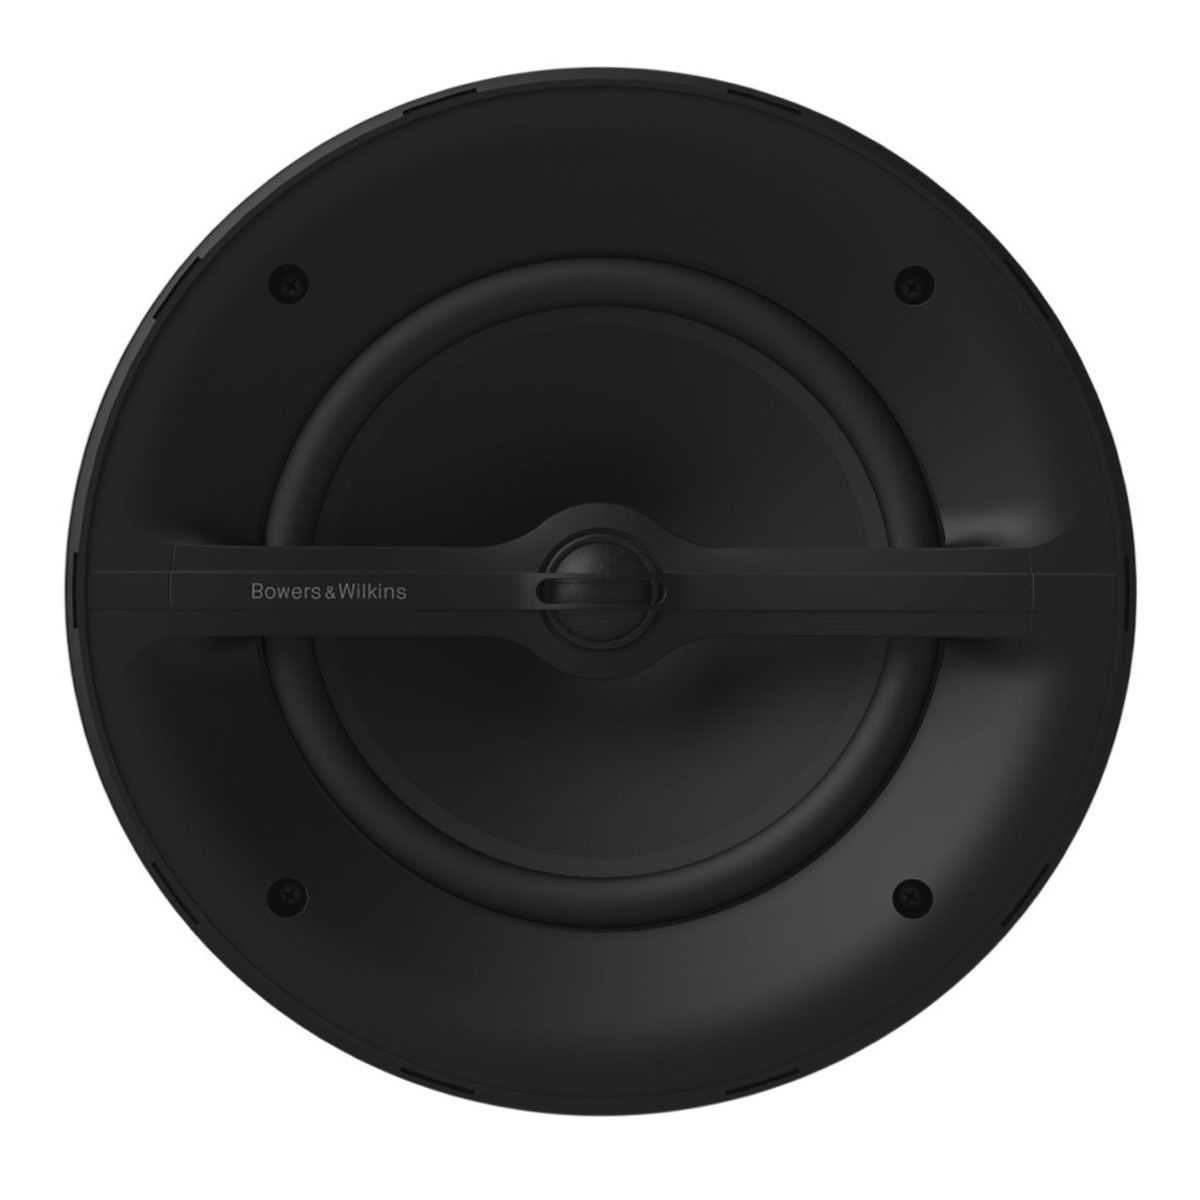 Bowers & Wilkins Marine 8 Two-way Loudspeaker without grill